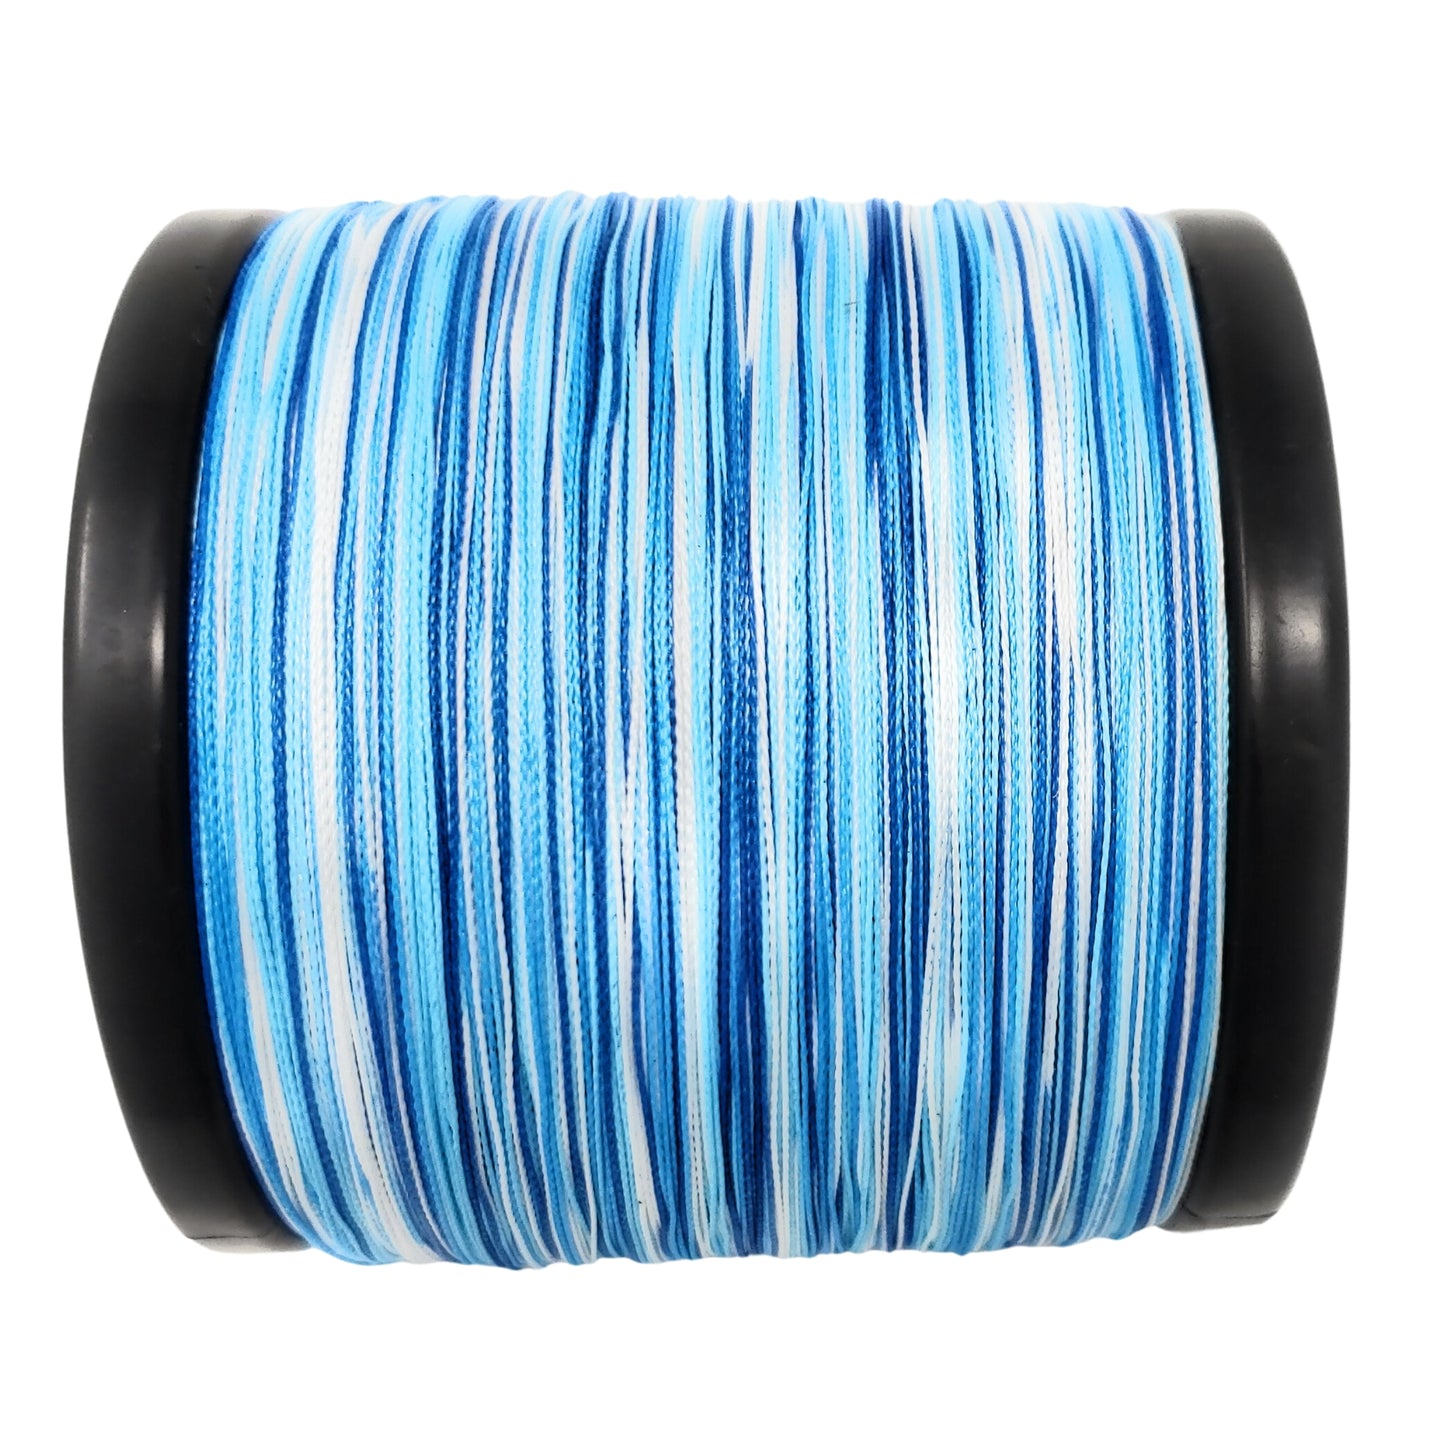 Reaction Tackle Braided Fishing Line Blue Camo 20lb 500yd